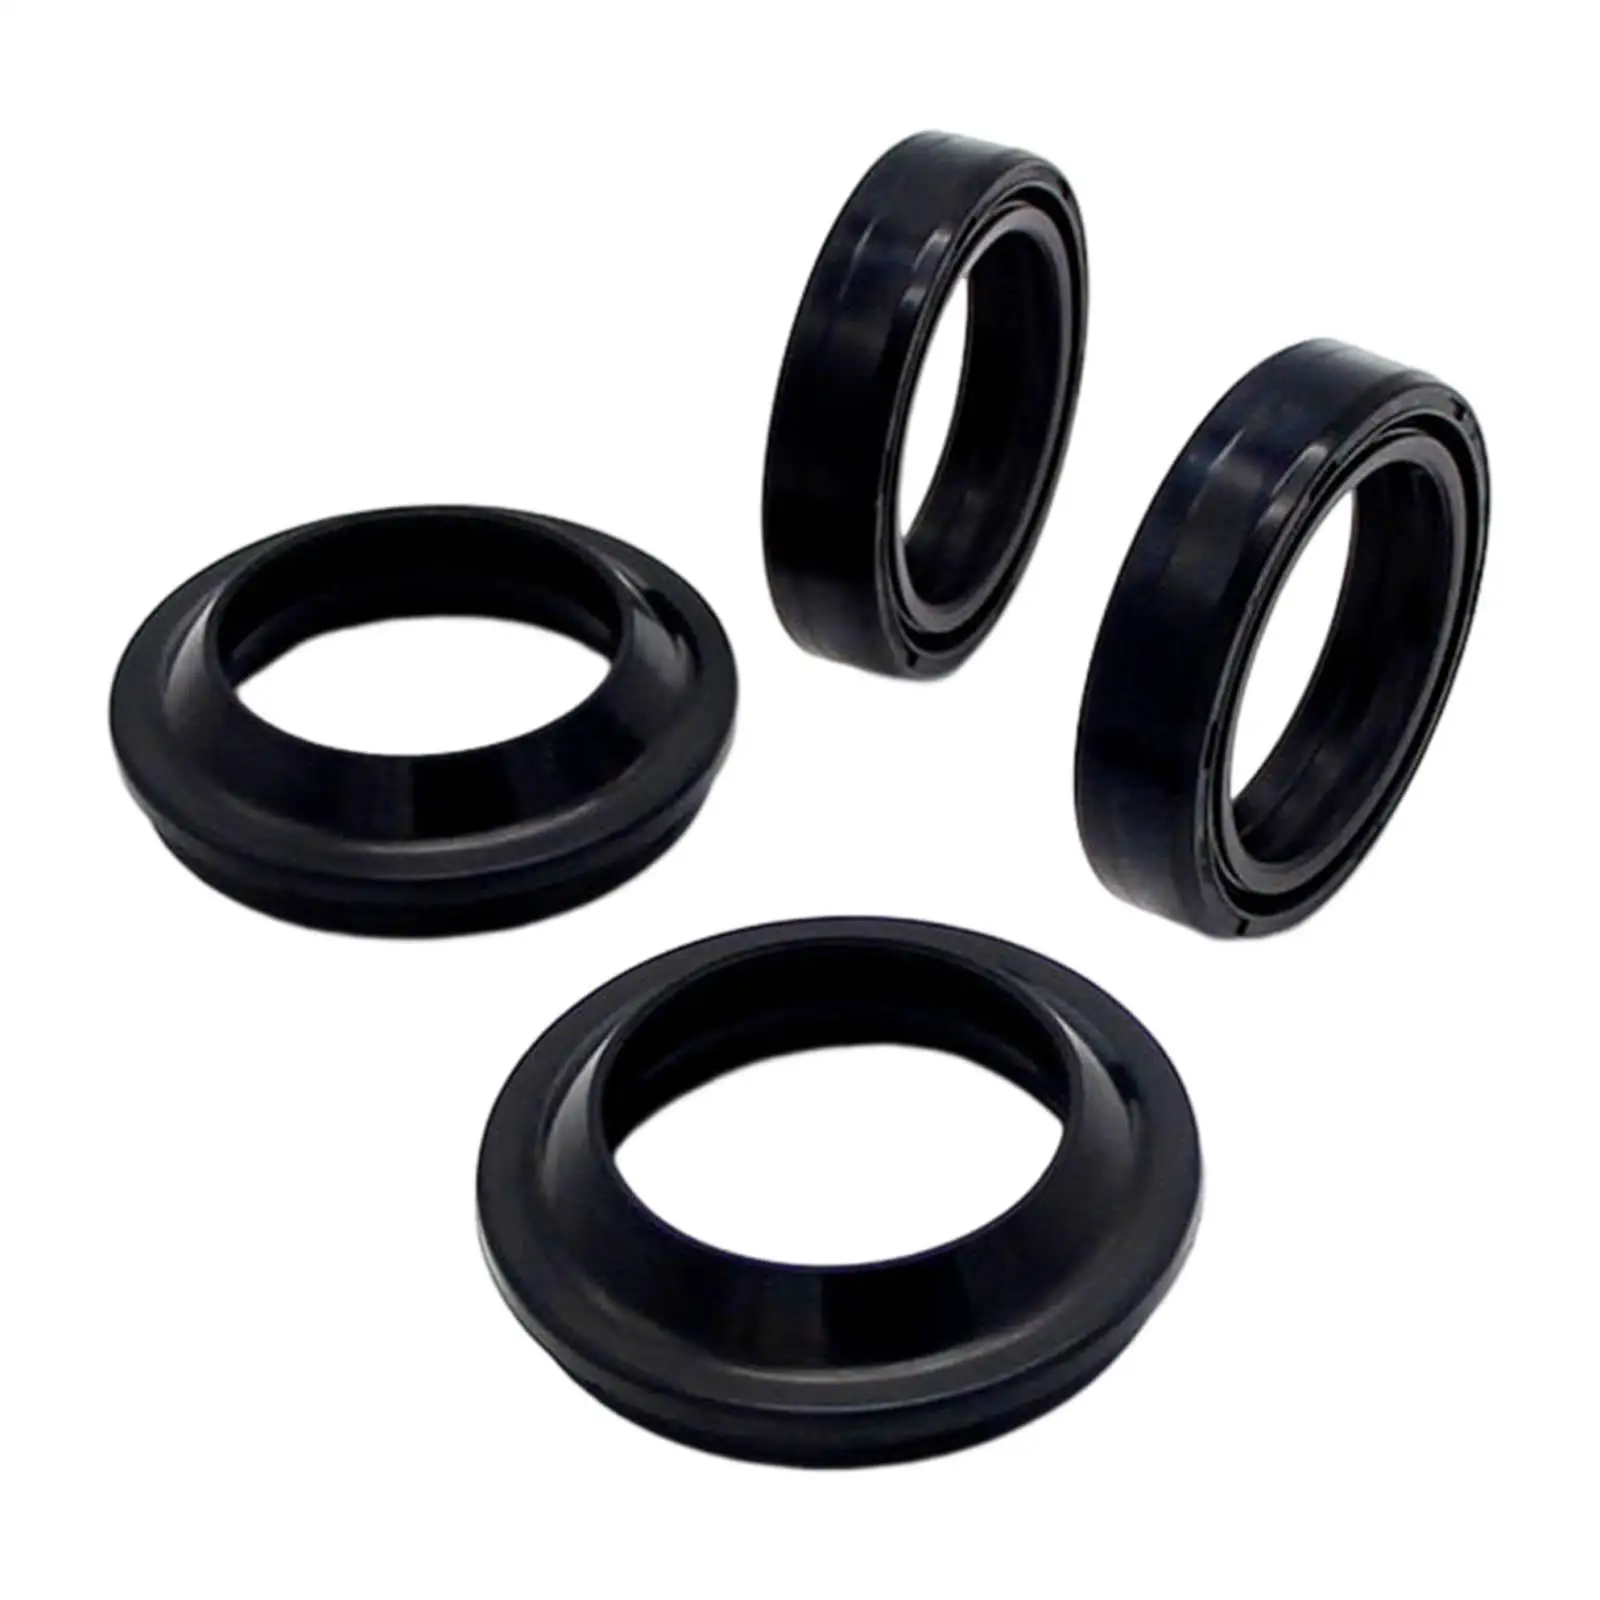 Motorcycle Front Fork Oil Seal and Dust Seal Kit 35x48x11mm Motorbike Spare Parts Durable Direct Replacements for Honda